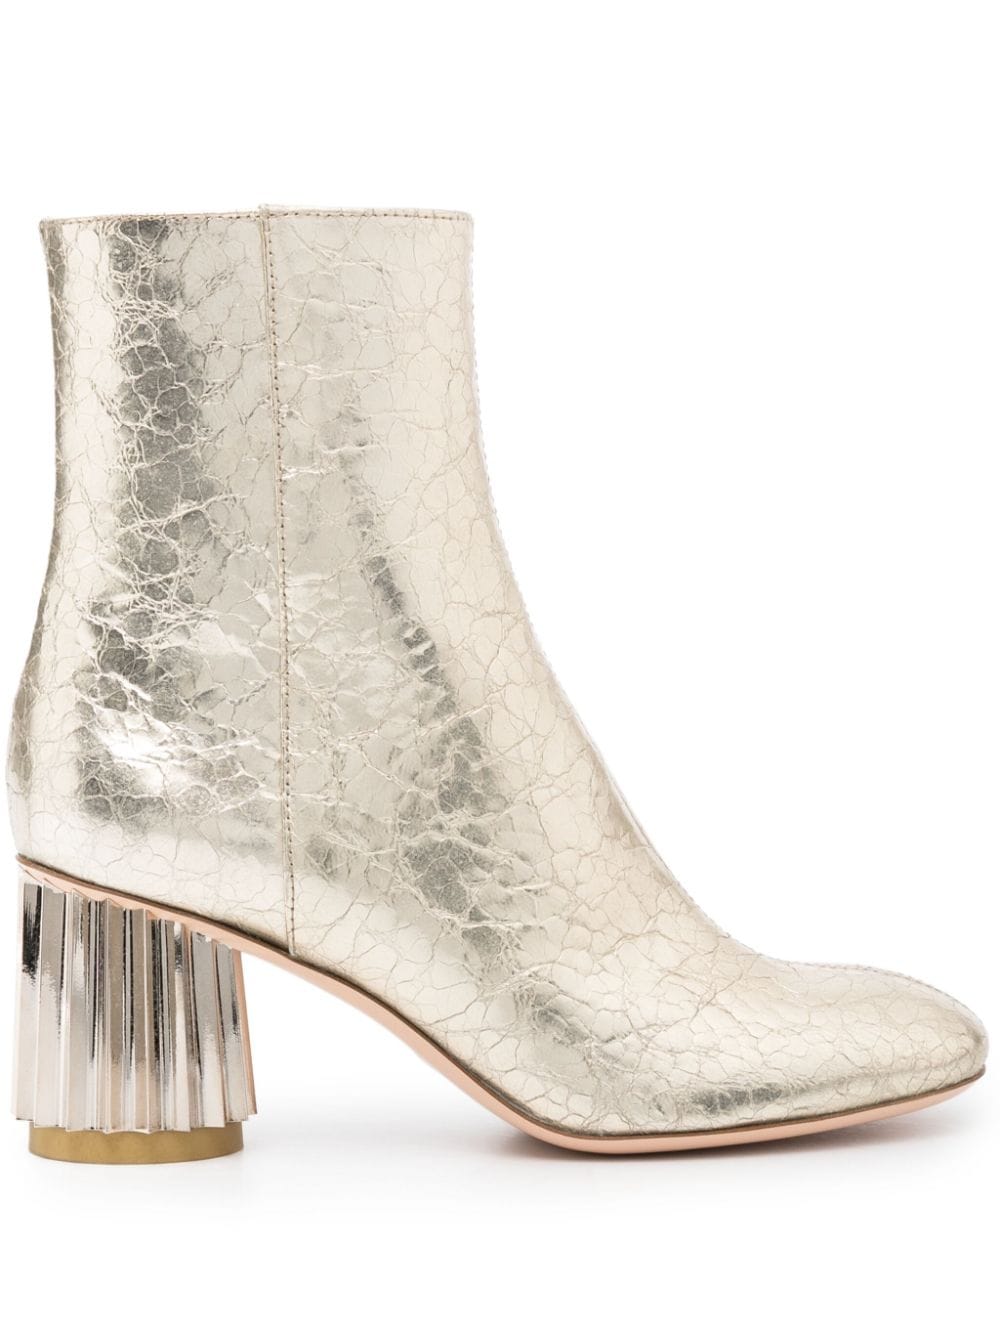 AGL 75mm metallic-cracked ankle boots - Gold von AGL